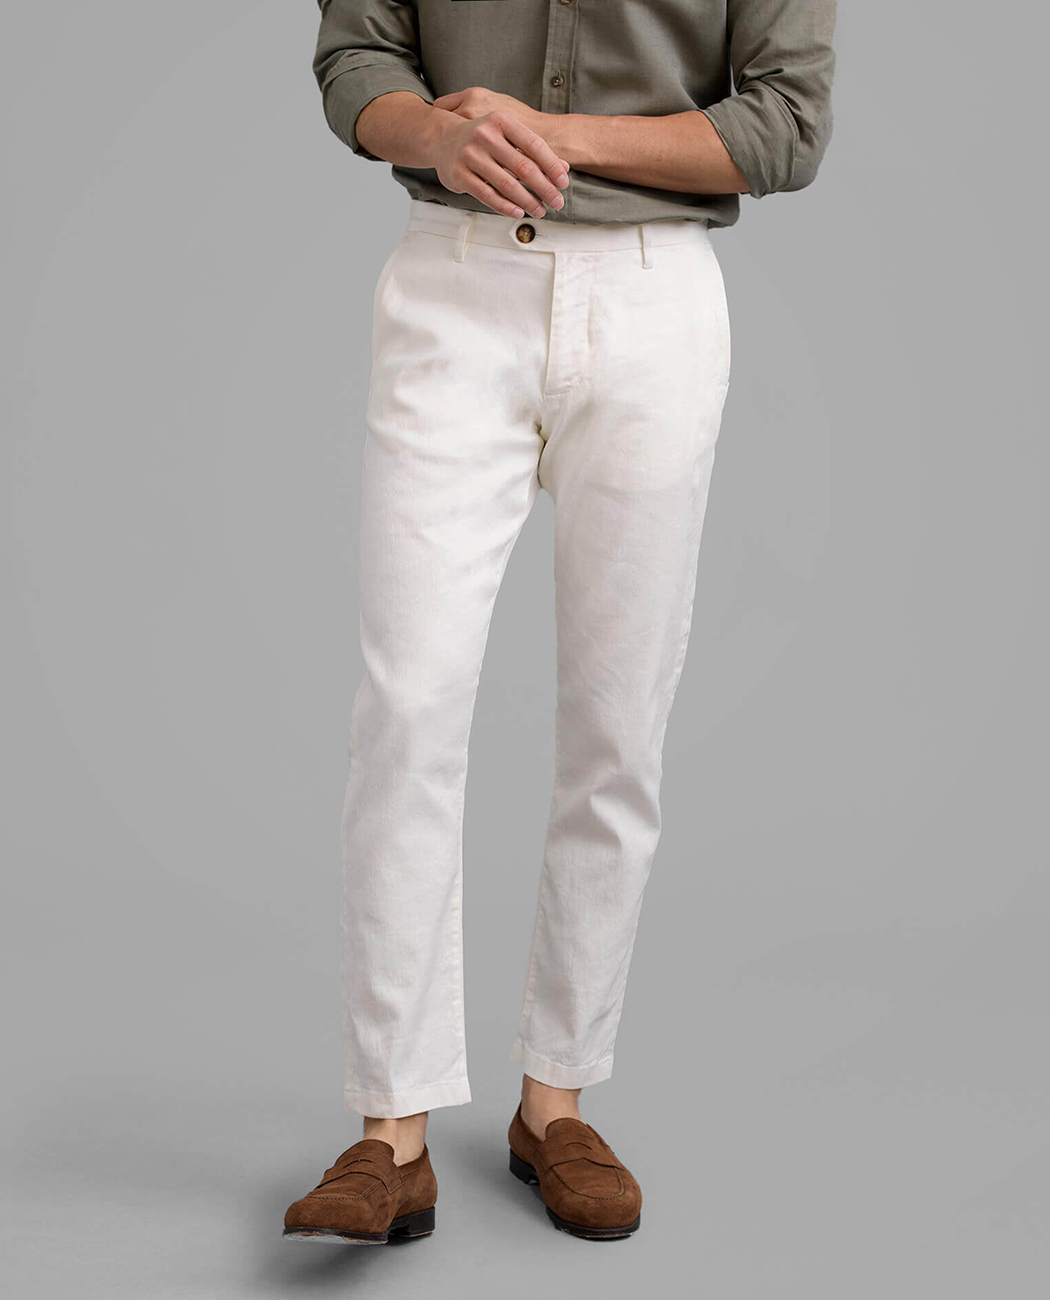 Buy NAARI Off White Cotton Slim Fit Embroidered Cigarette Trousers for  Women's at Amazon.in